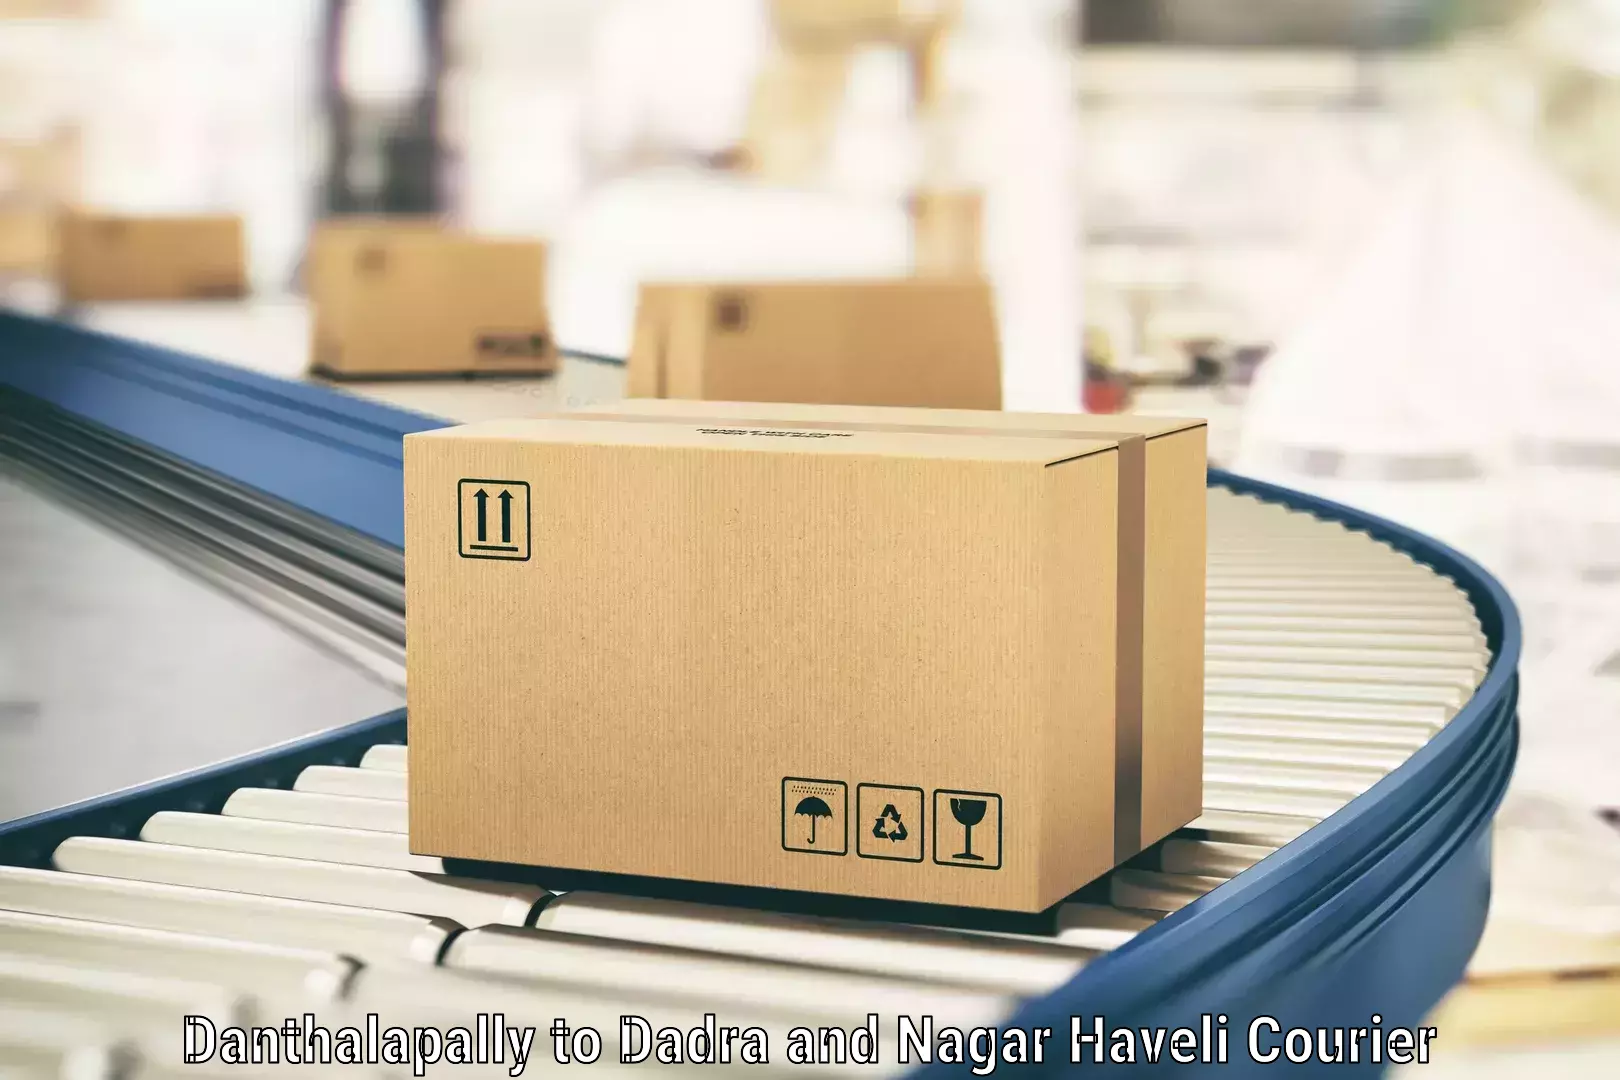 Parcel handling and care in Danthalapally to Dadra and Nagar Haveli